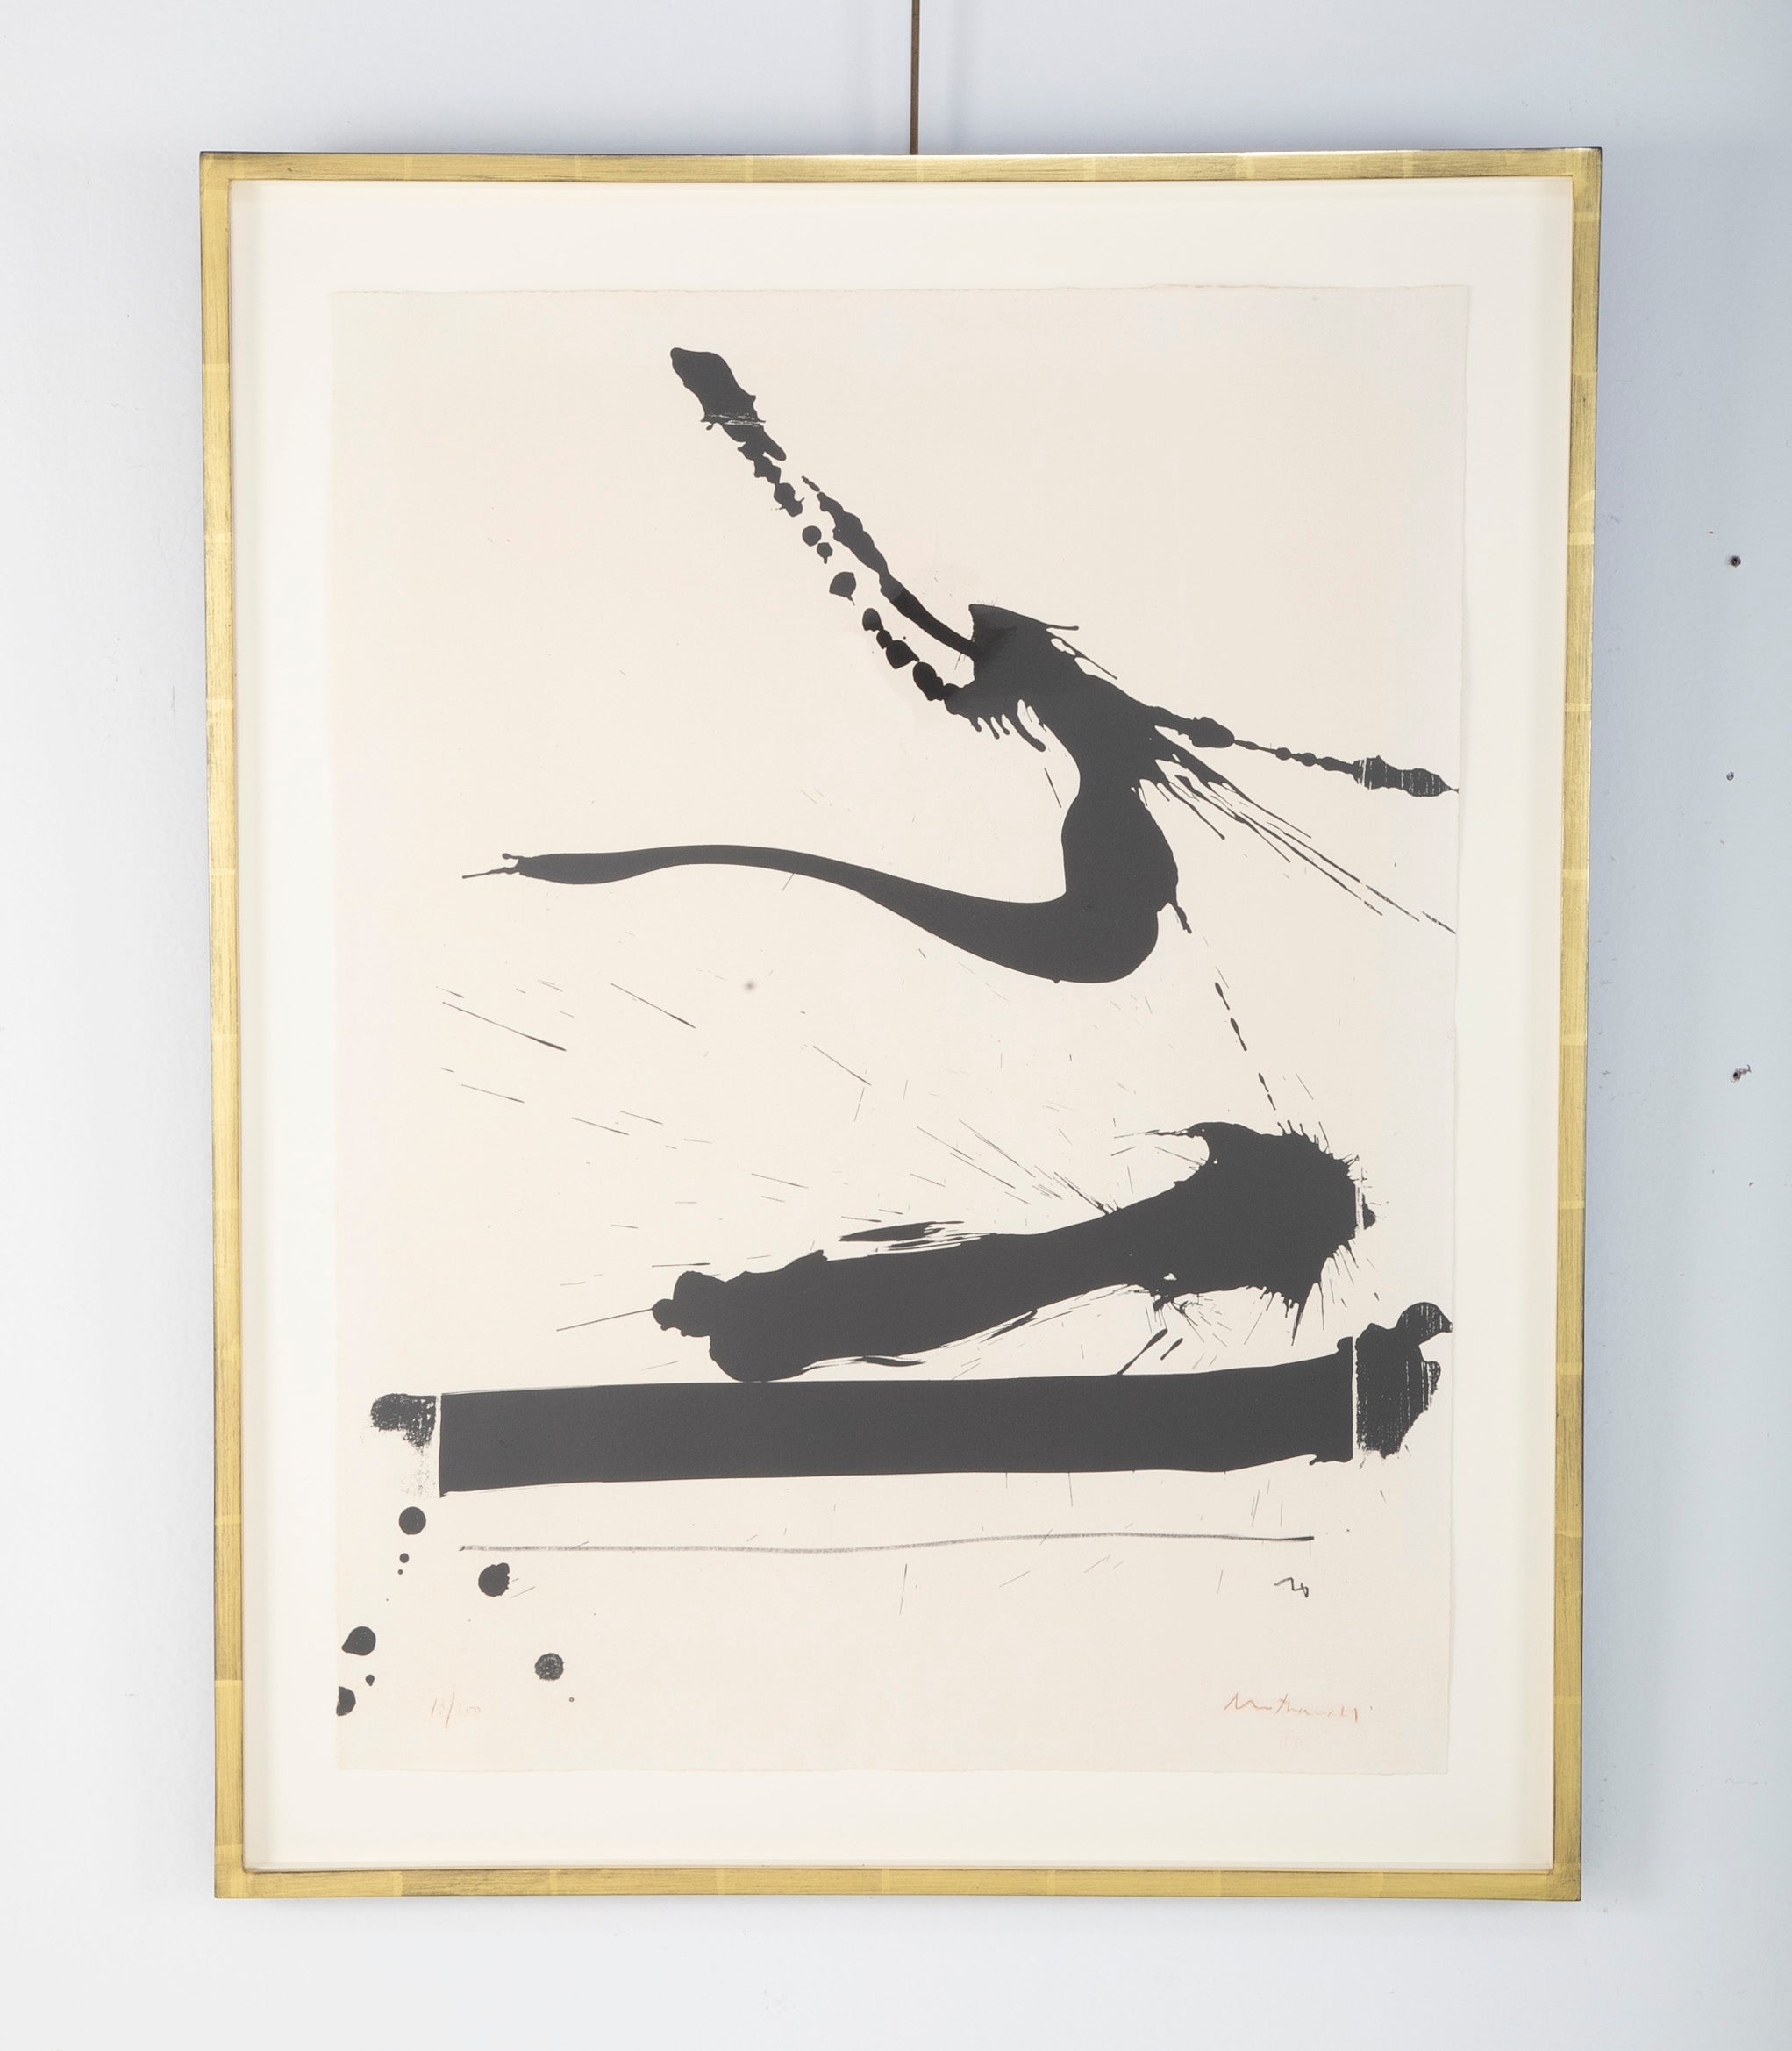 "Automation A" Lithograph by Robert Motherwell